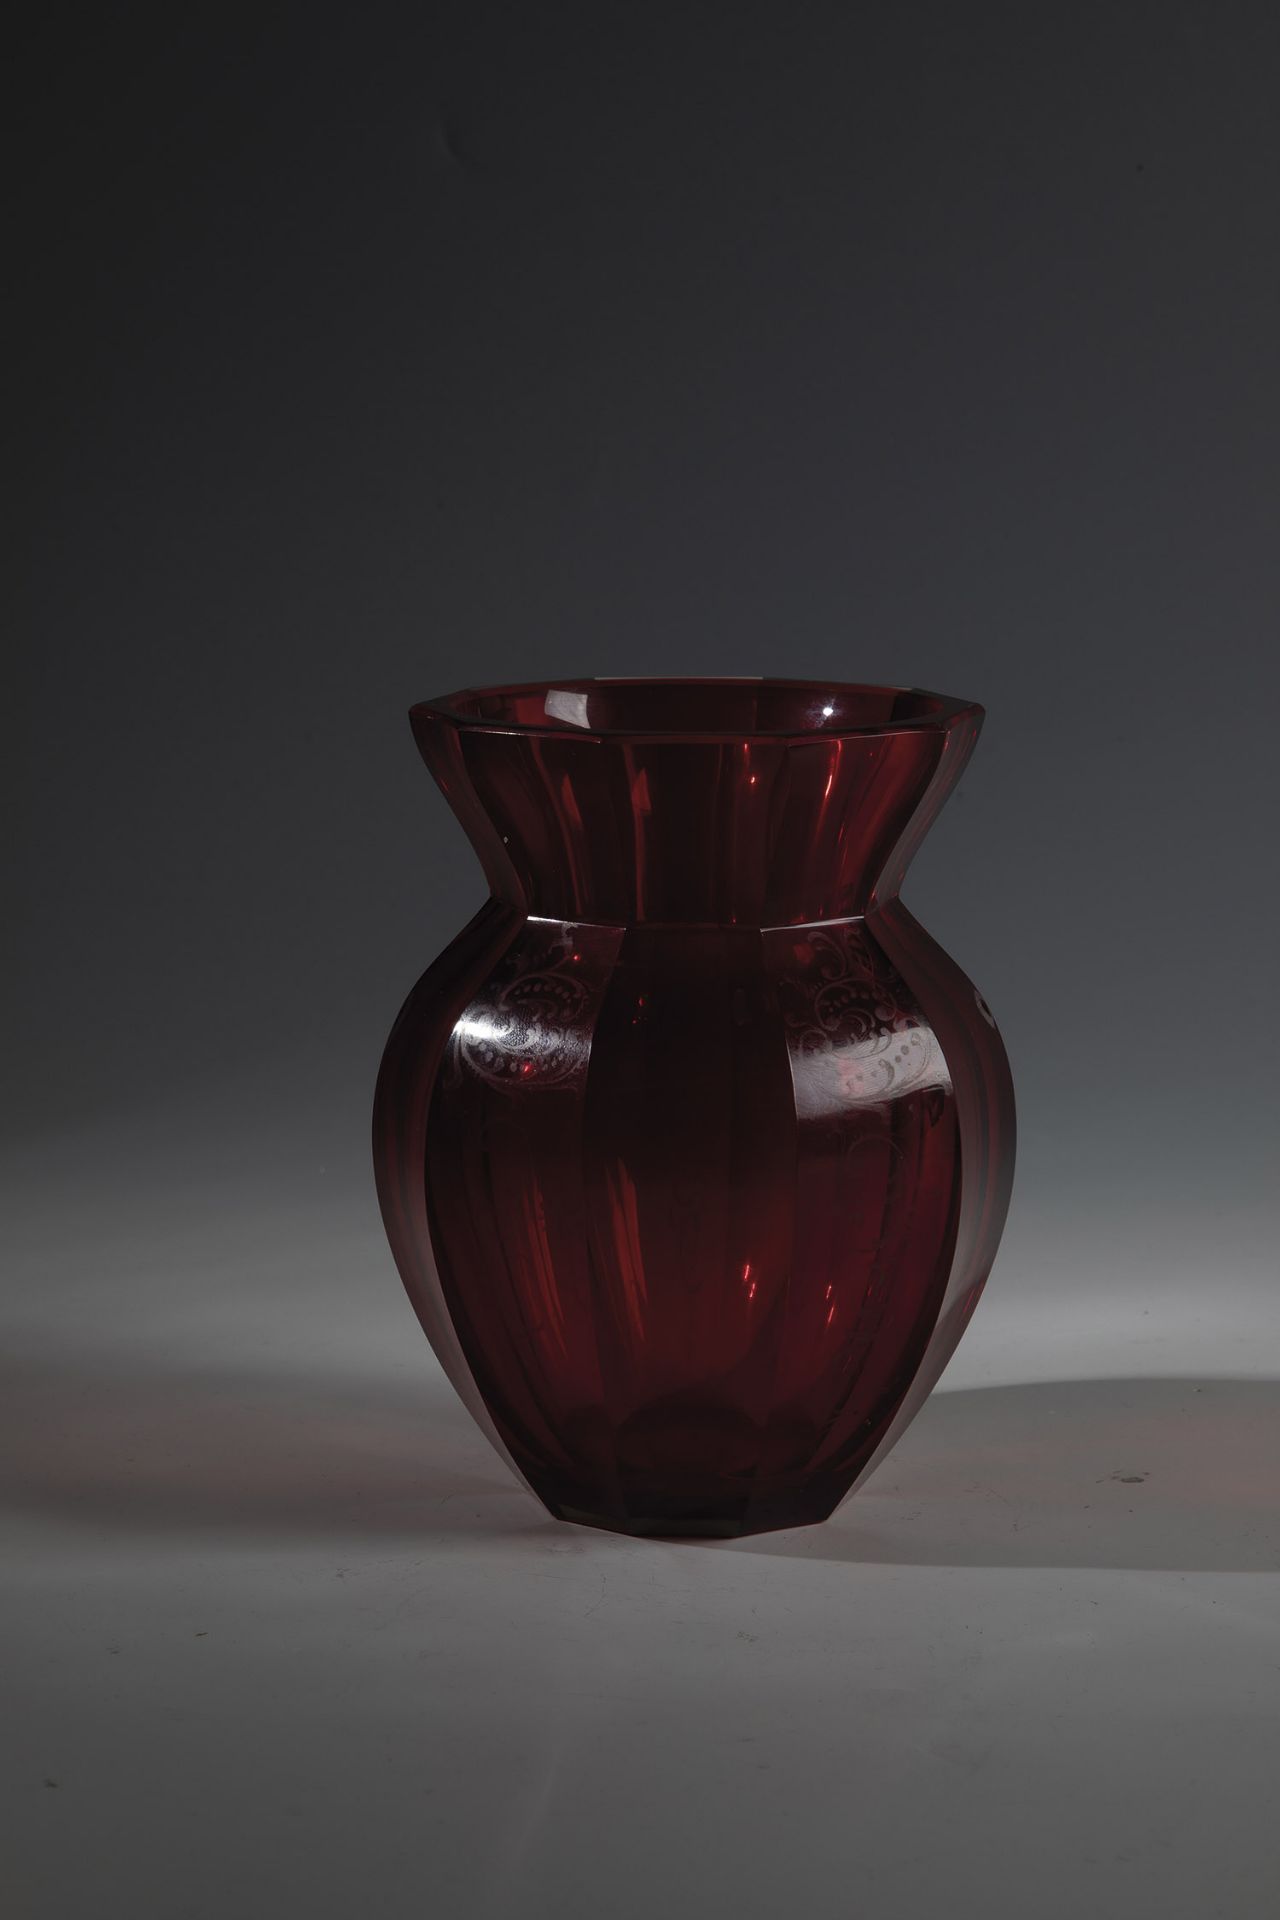 Vase Bohemia, 20th century Ruby glass vase with tendril decoration in silver and gold. Heavily